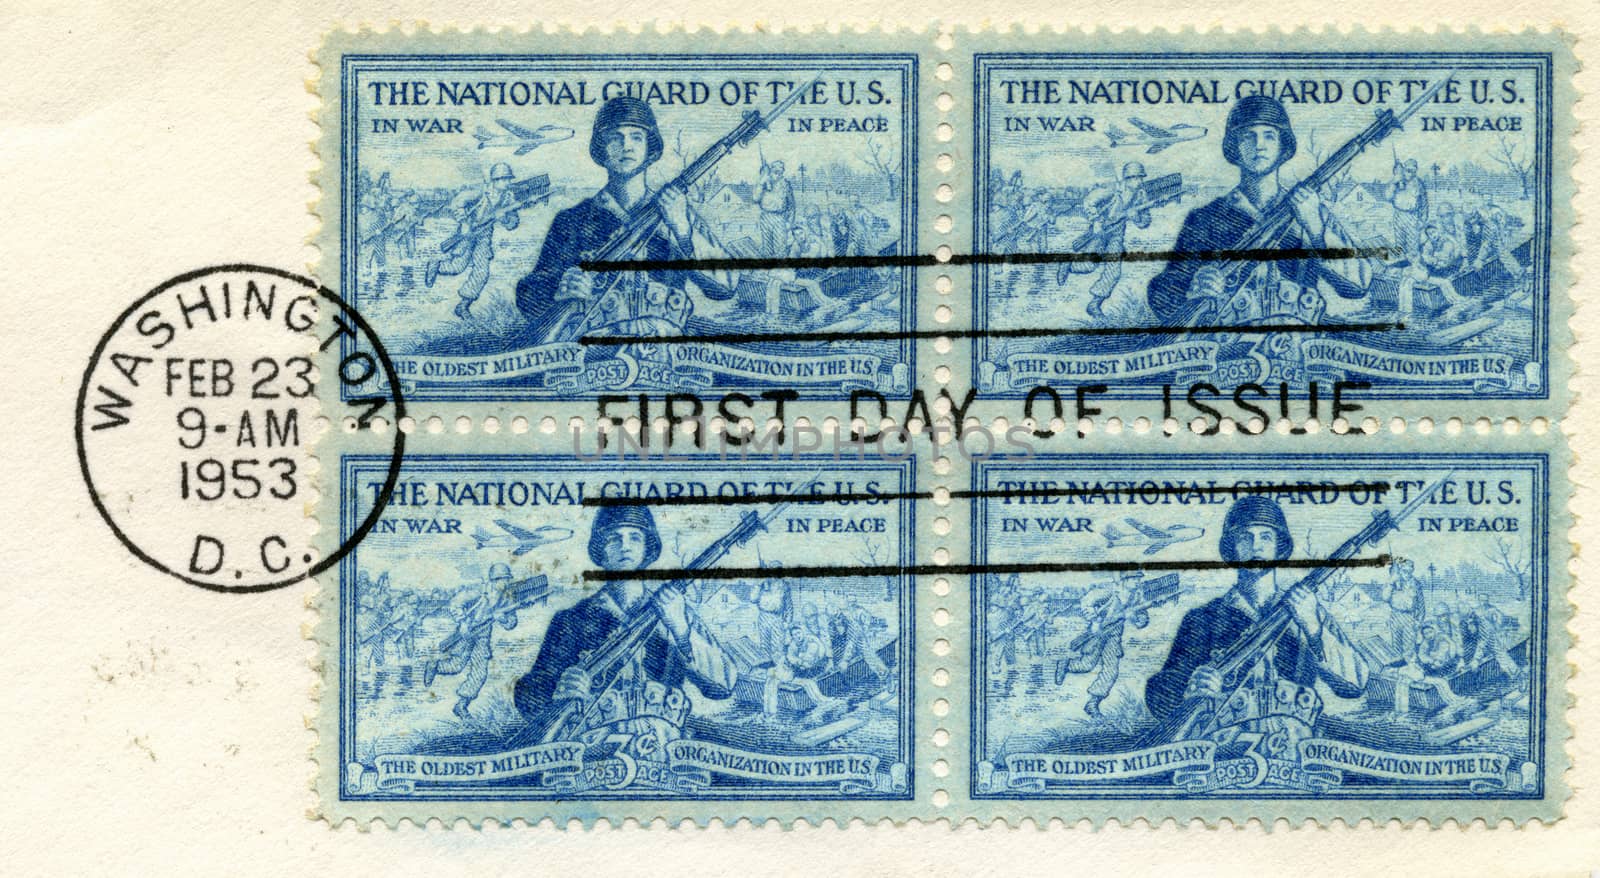 U.S. Postage Stamps commemorating the U.S. National Guard. Stamps are pre-1978 and are cancelled (from my personal stamp collection.)